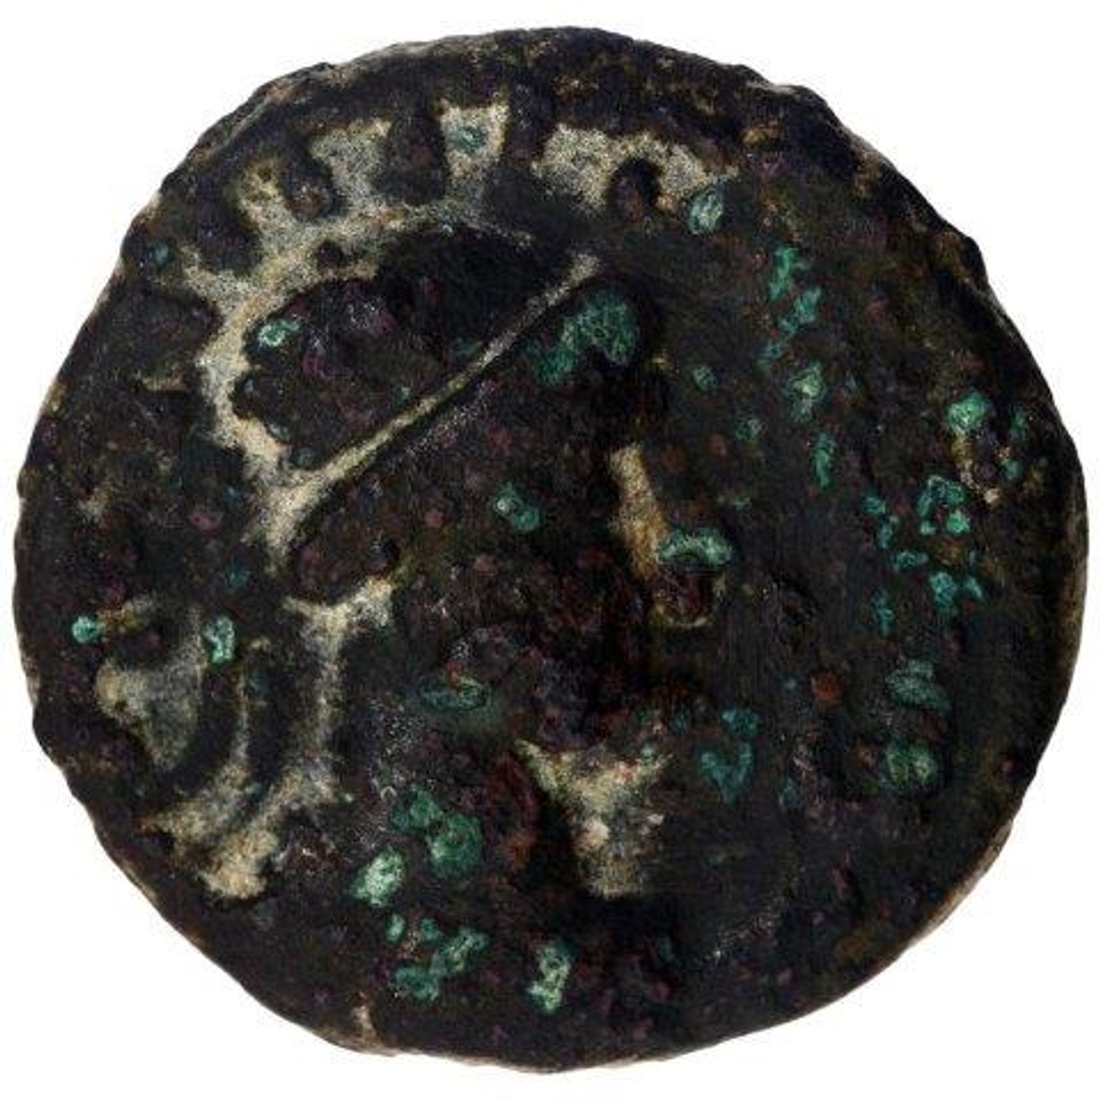 Copper Tetra Drachma Coin of Soter Meghas of Kushan Dynasty.